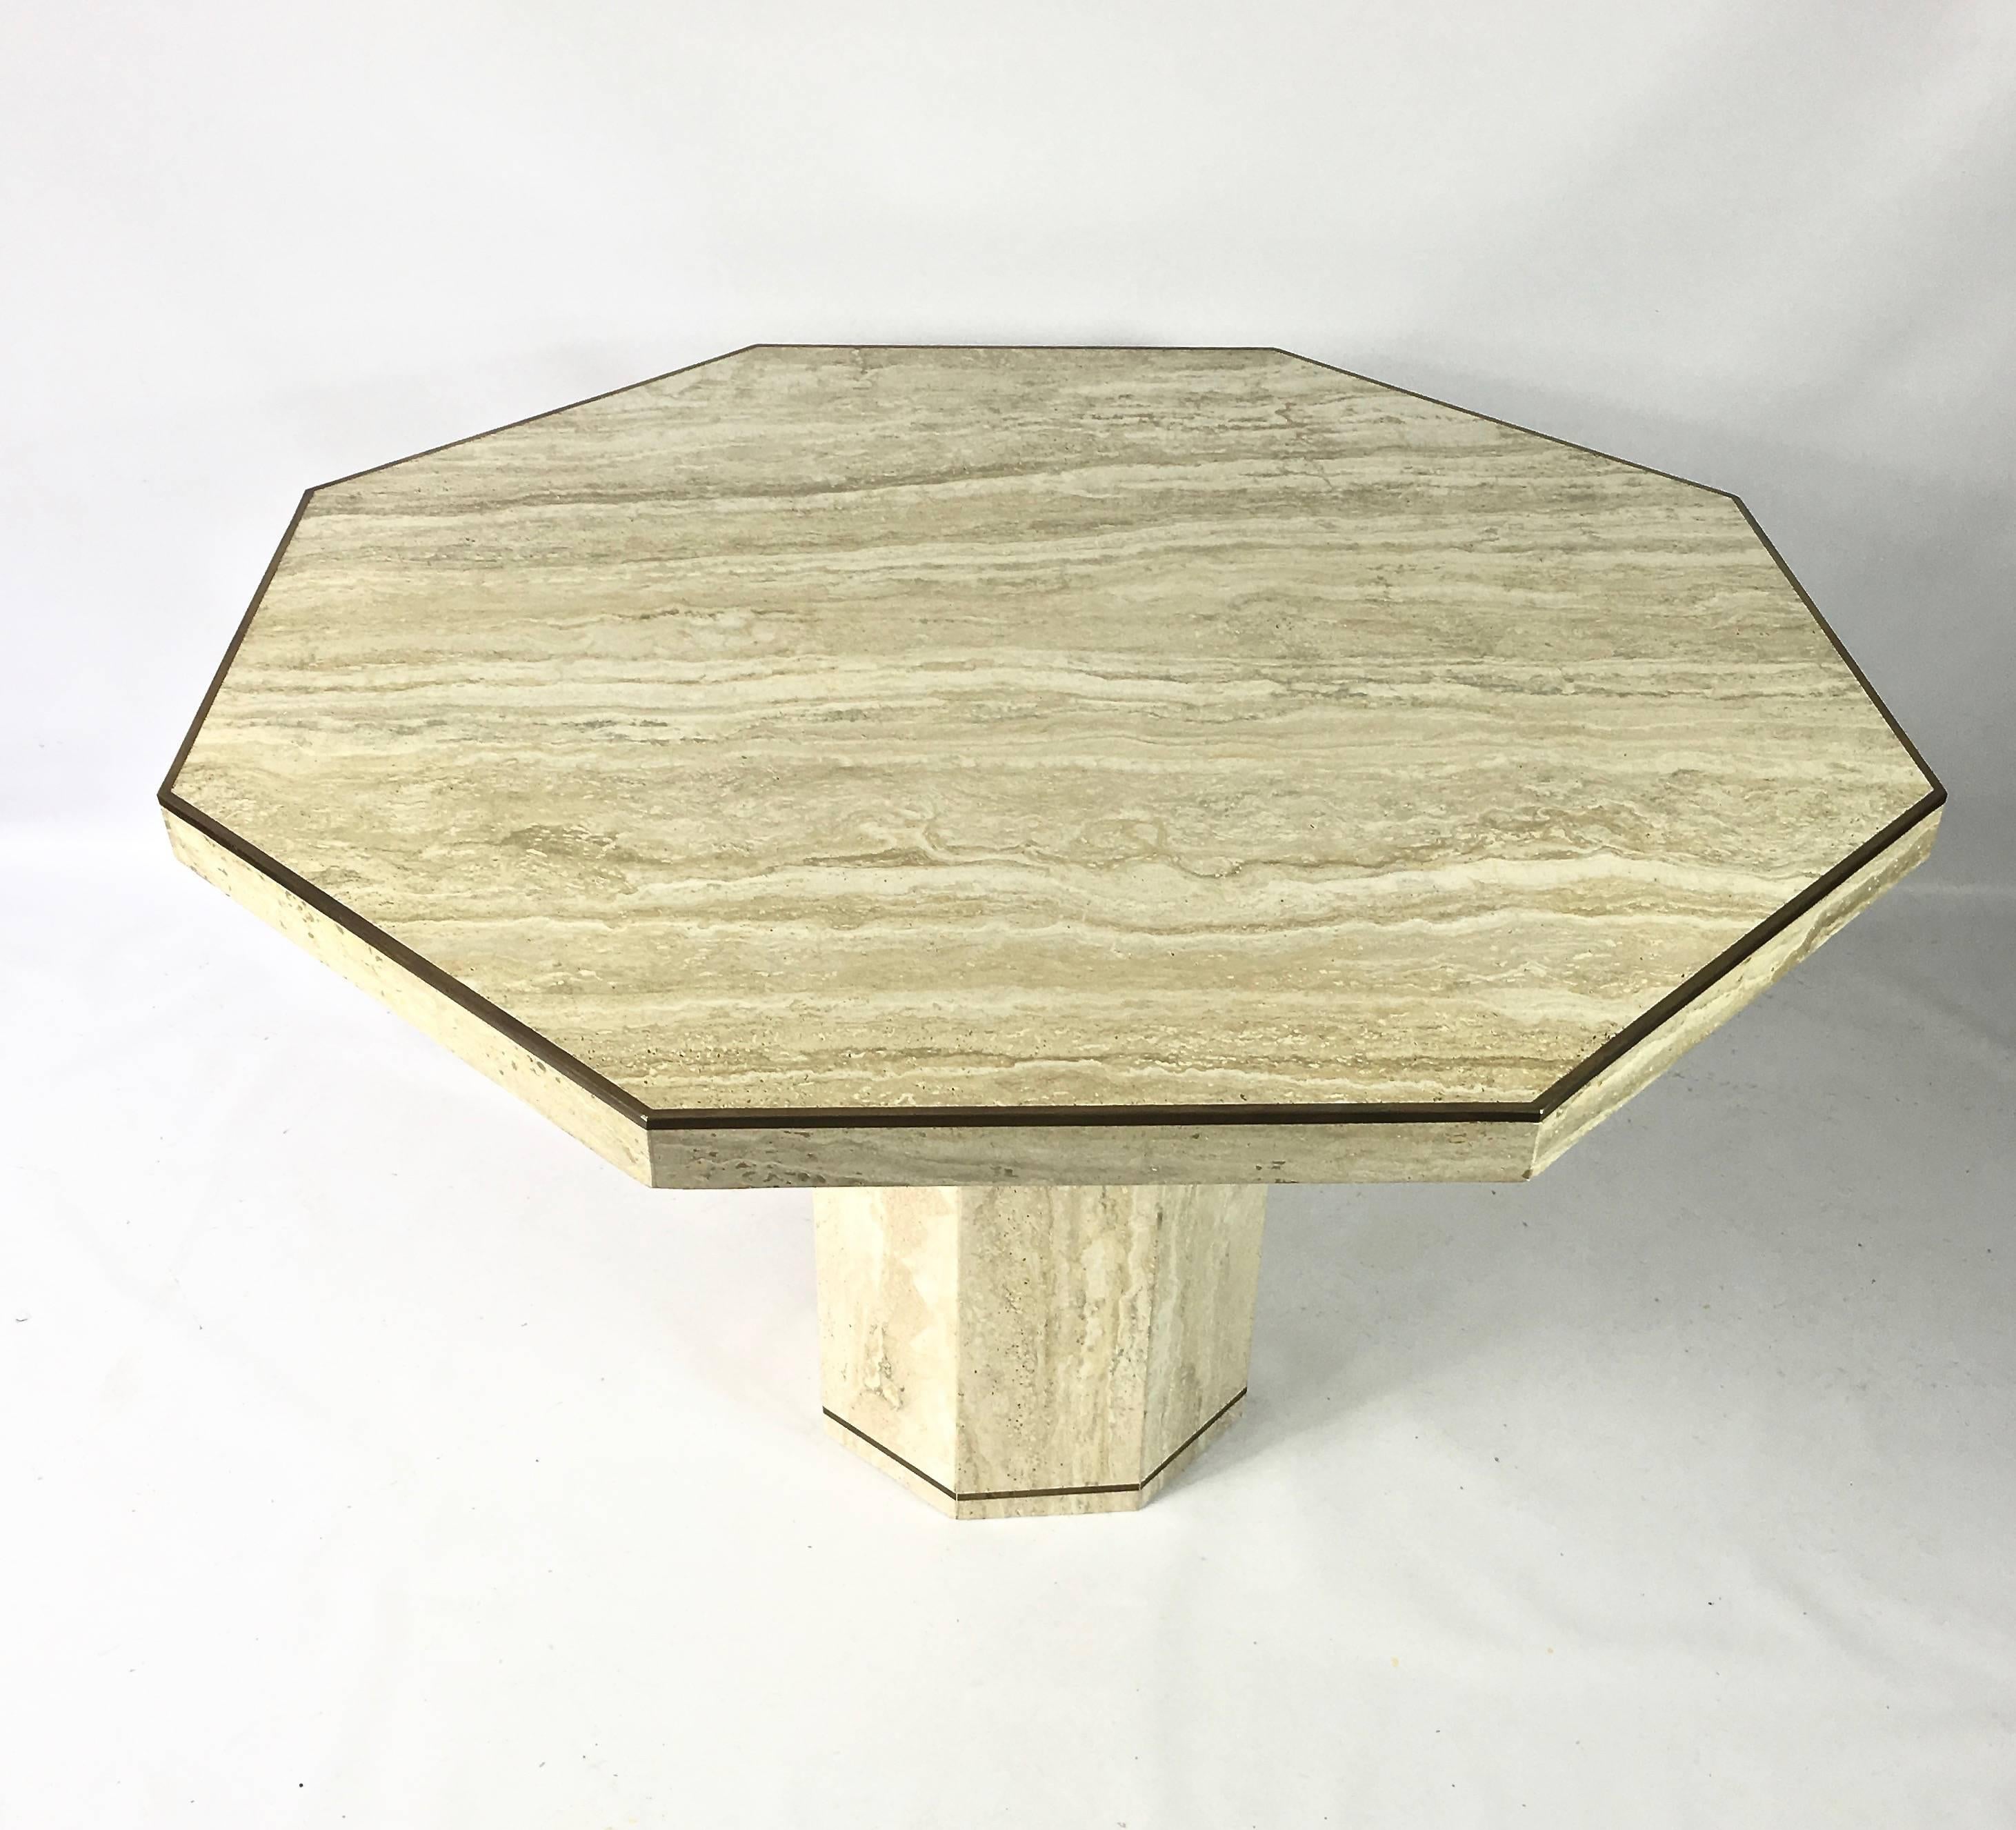 Stunning octagonal slab of travertine marble edged with a brass edge, sits upon a Travertine pedestal base, with a inlaid brass detail. Original Ello Label on bottom, made in Italy.

Base is 14.5